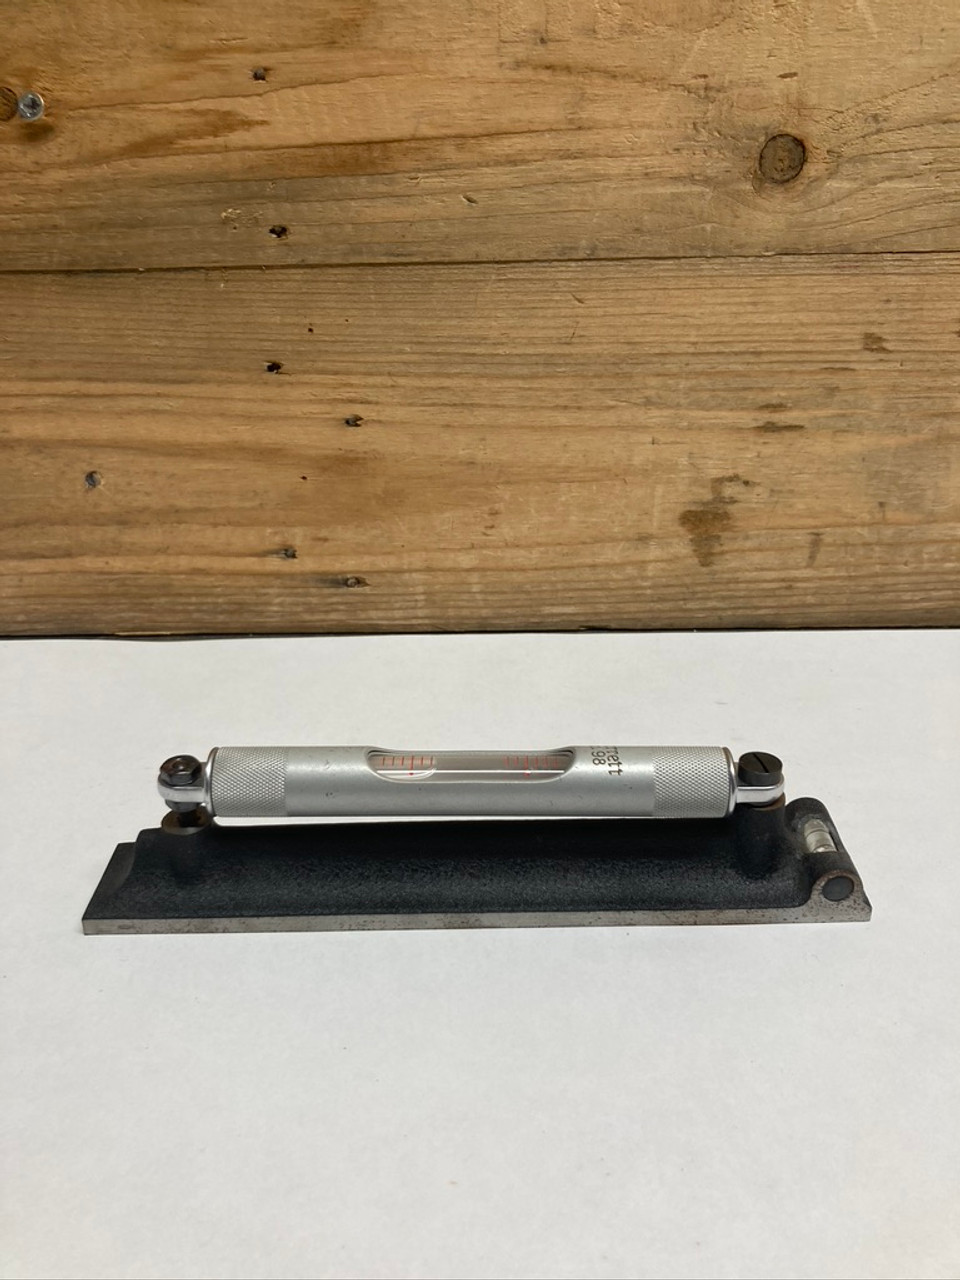 Starrett No. 98 Machinists Level with Ground and Graduated Vial